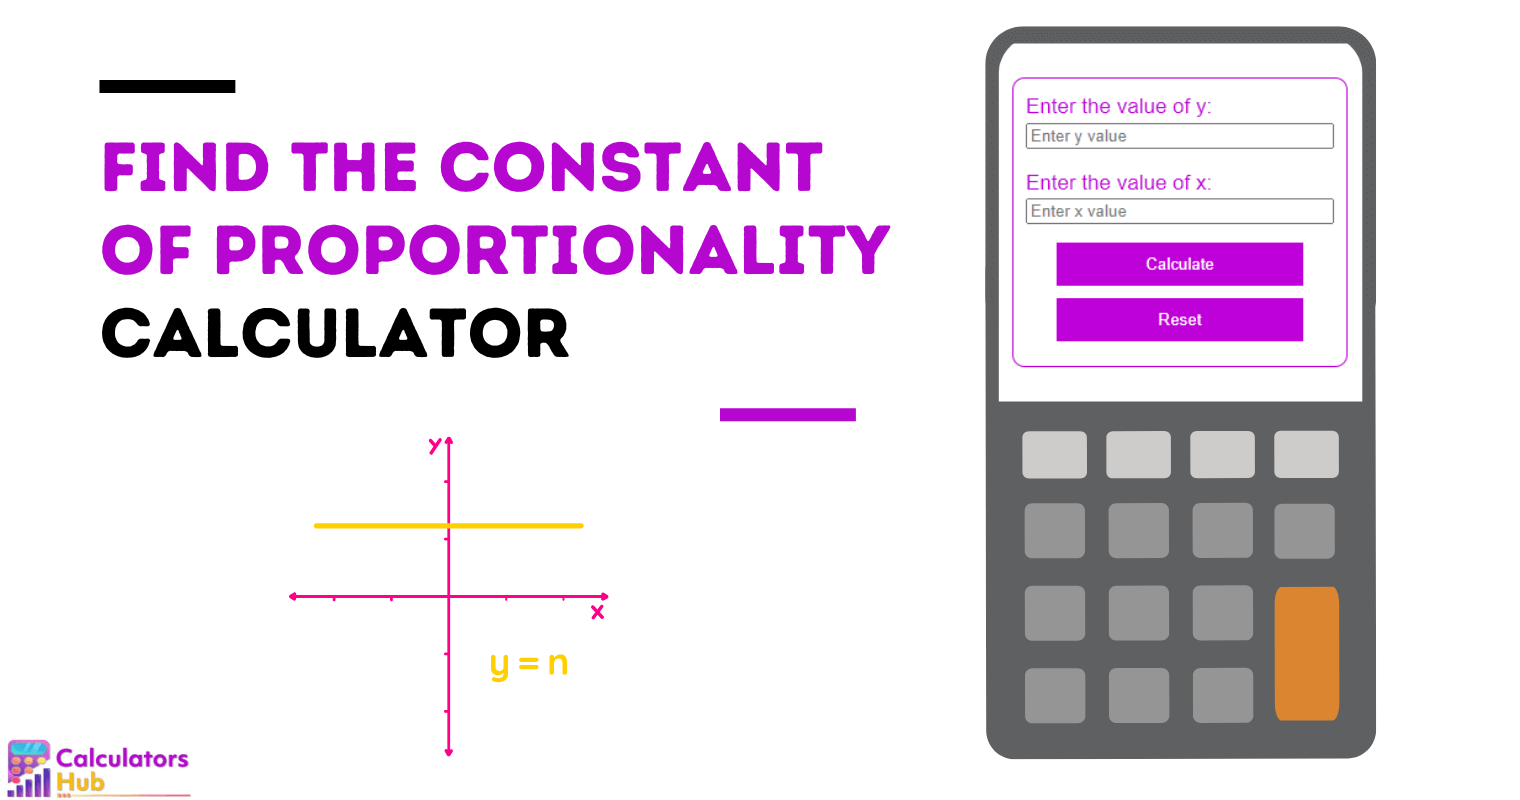 Find the Constant of Proportionality Calculator